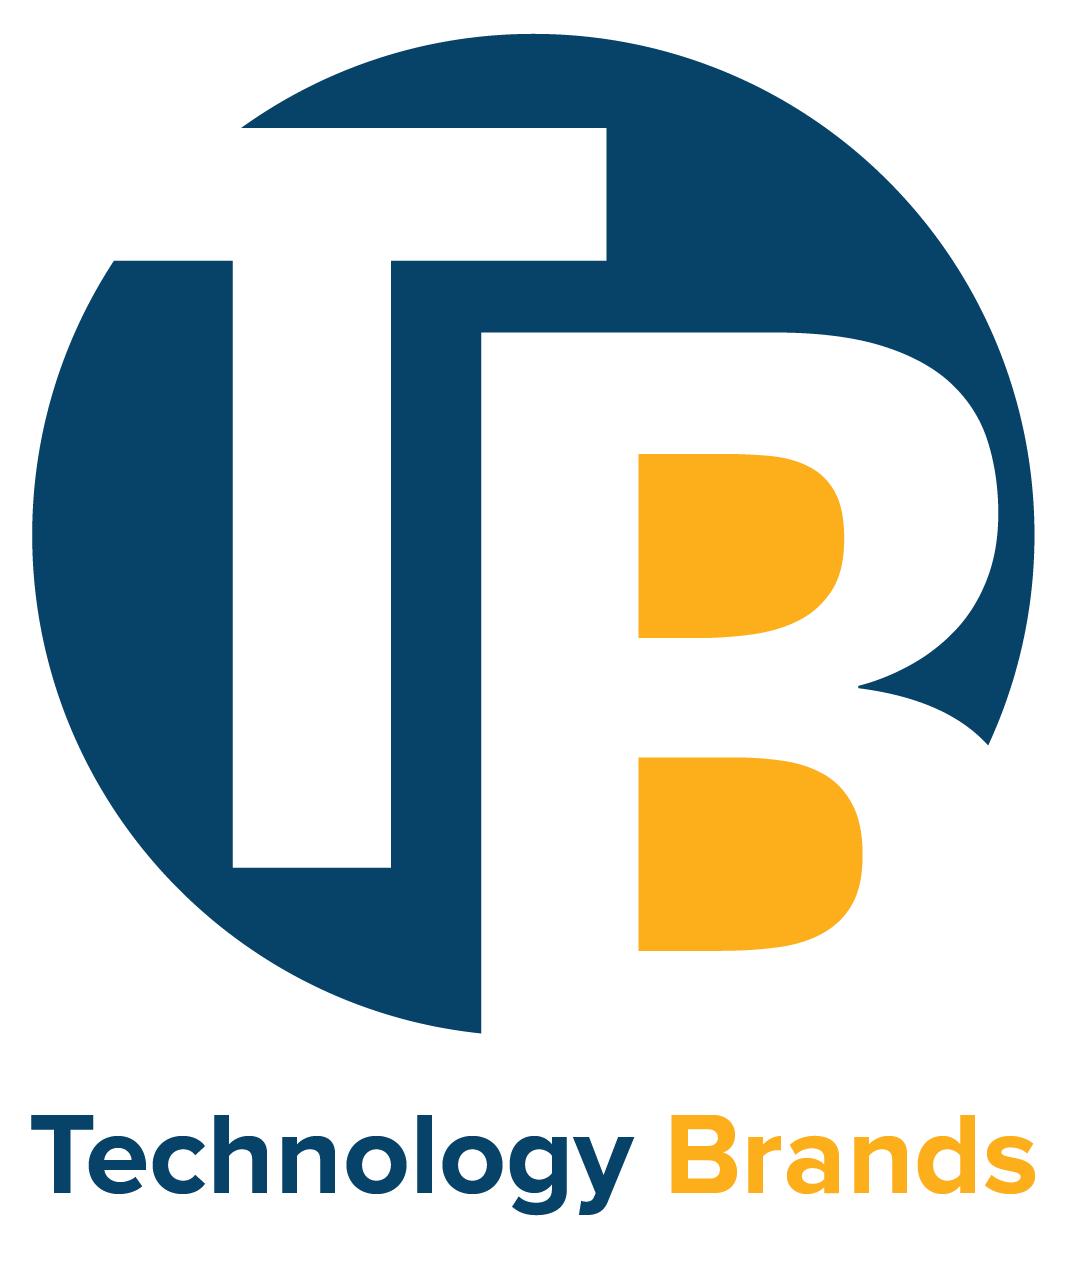 Technology Brands - Certification Training & IT Courses with Guaranteed ResultsVendor Logo